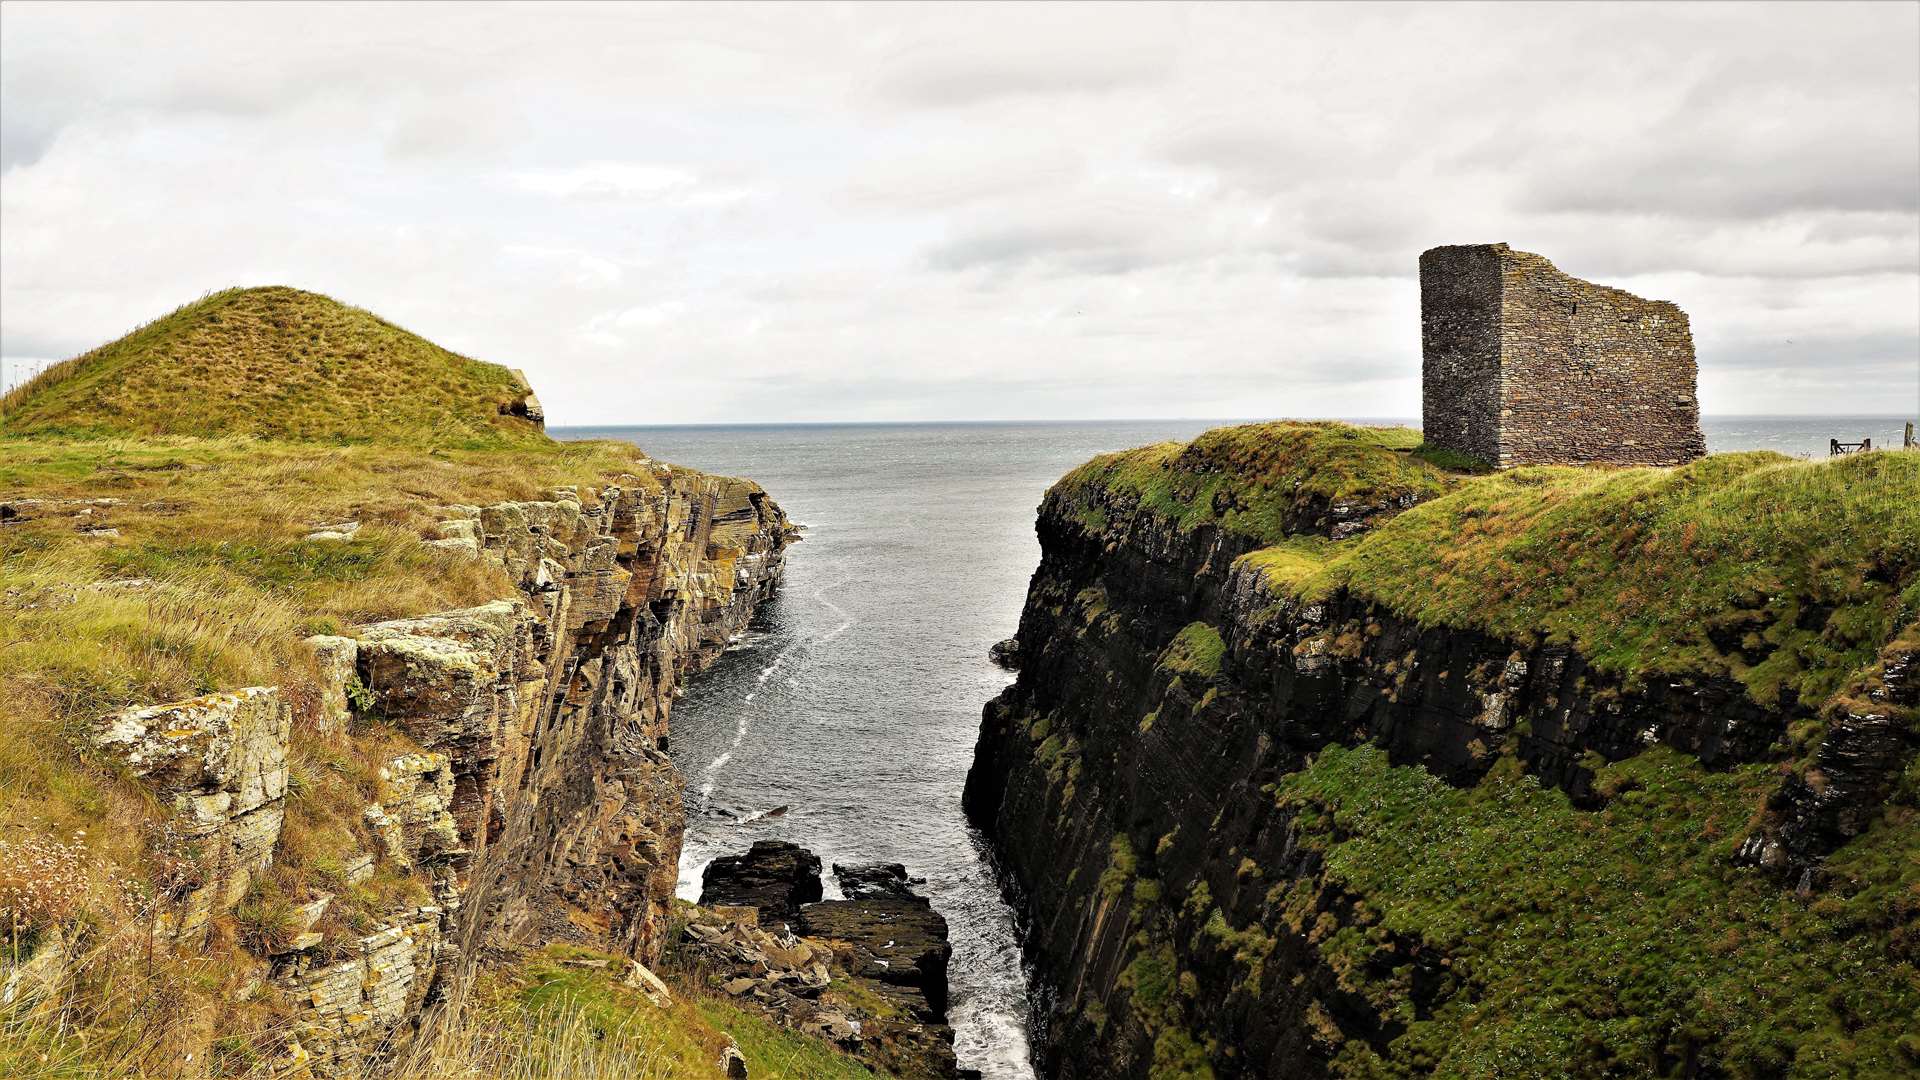 The Castle of old Wick is believed to be one of Scotland's oldest castles dating from the 1100s. Picture: DGS